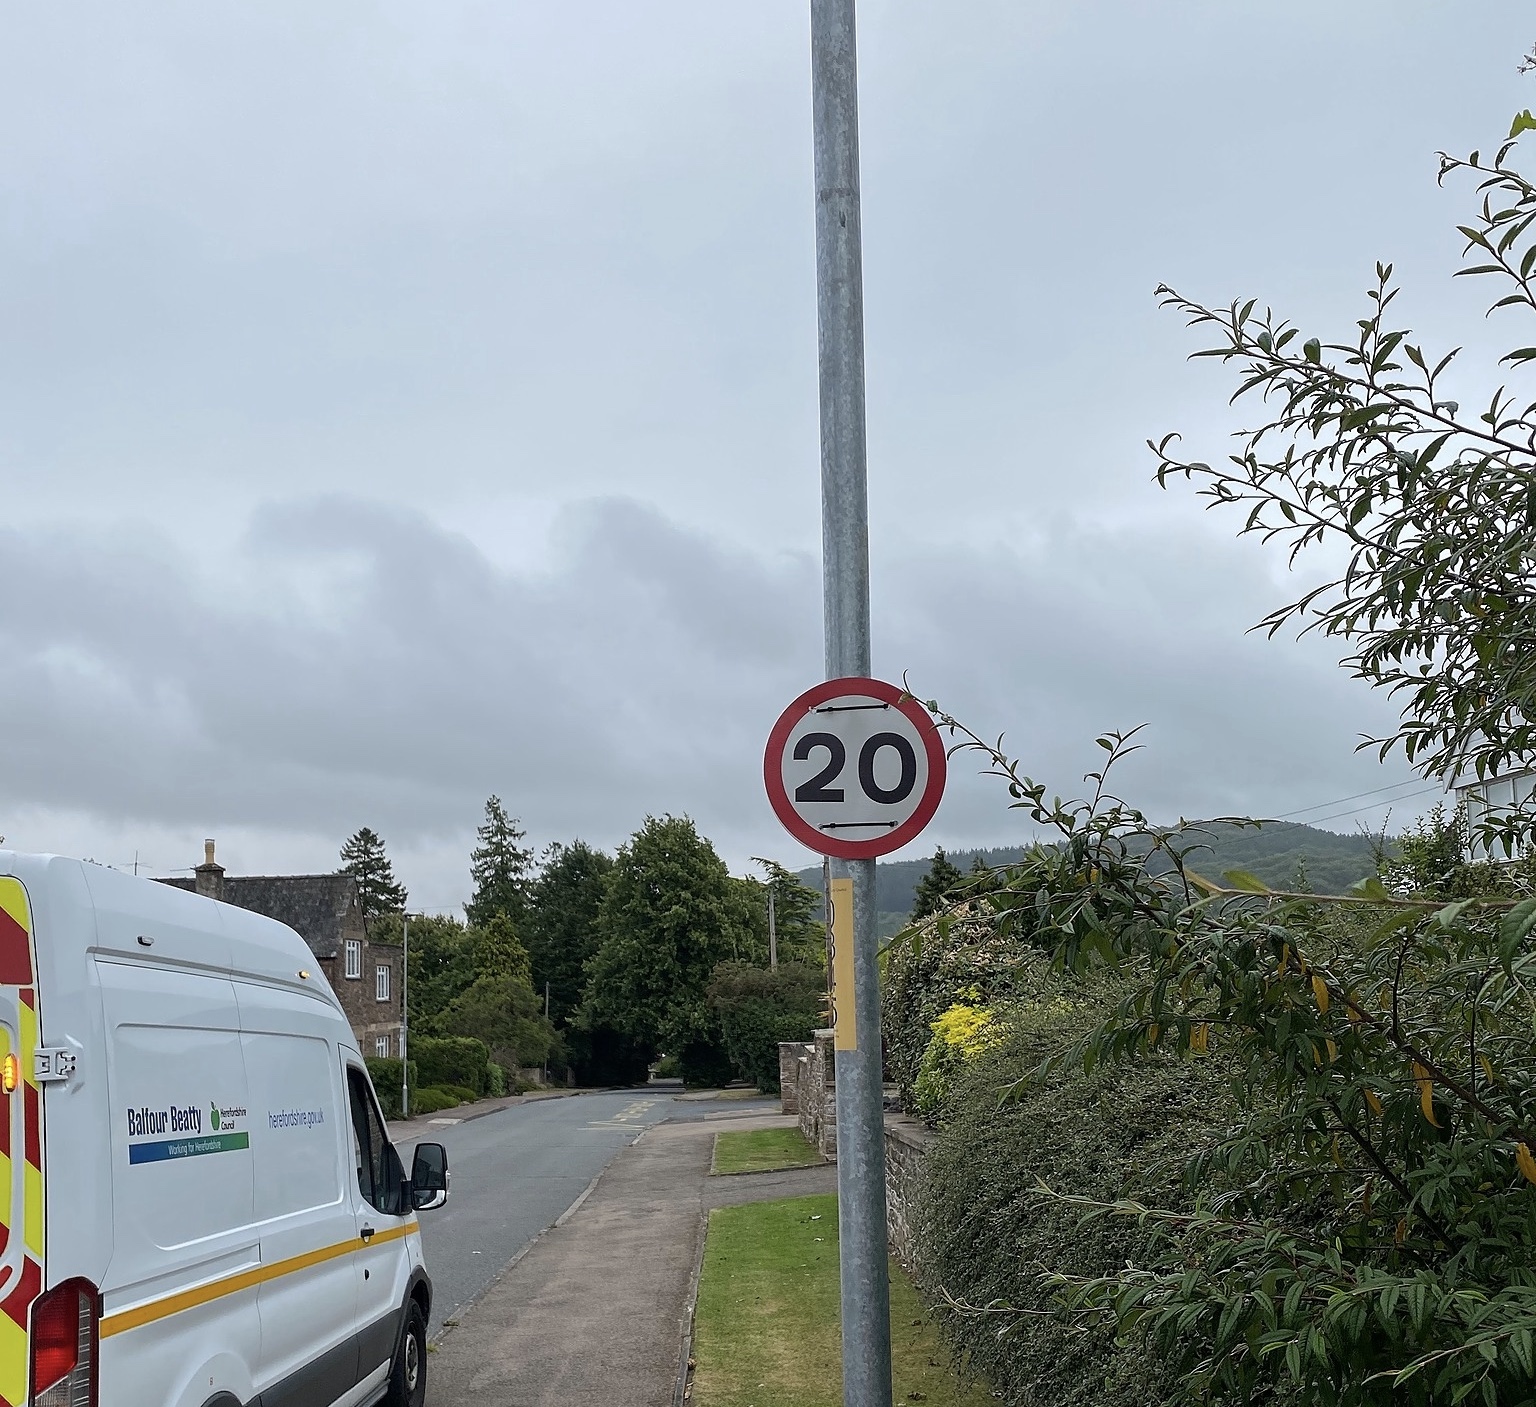 NEWS | 20mph speed limits introduced in market towns across Herefordshire